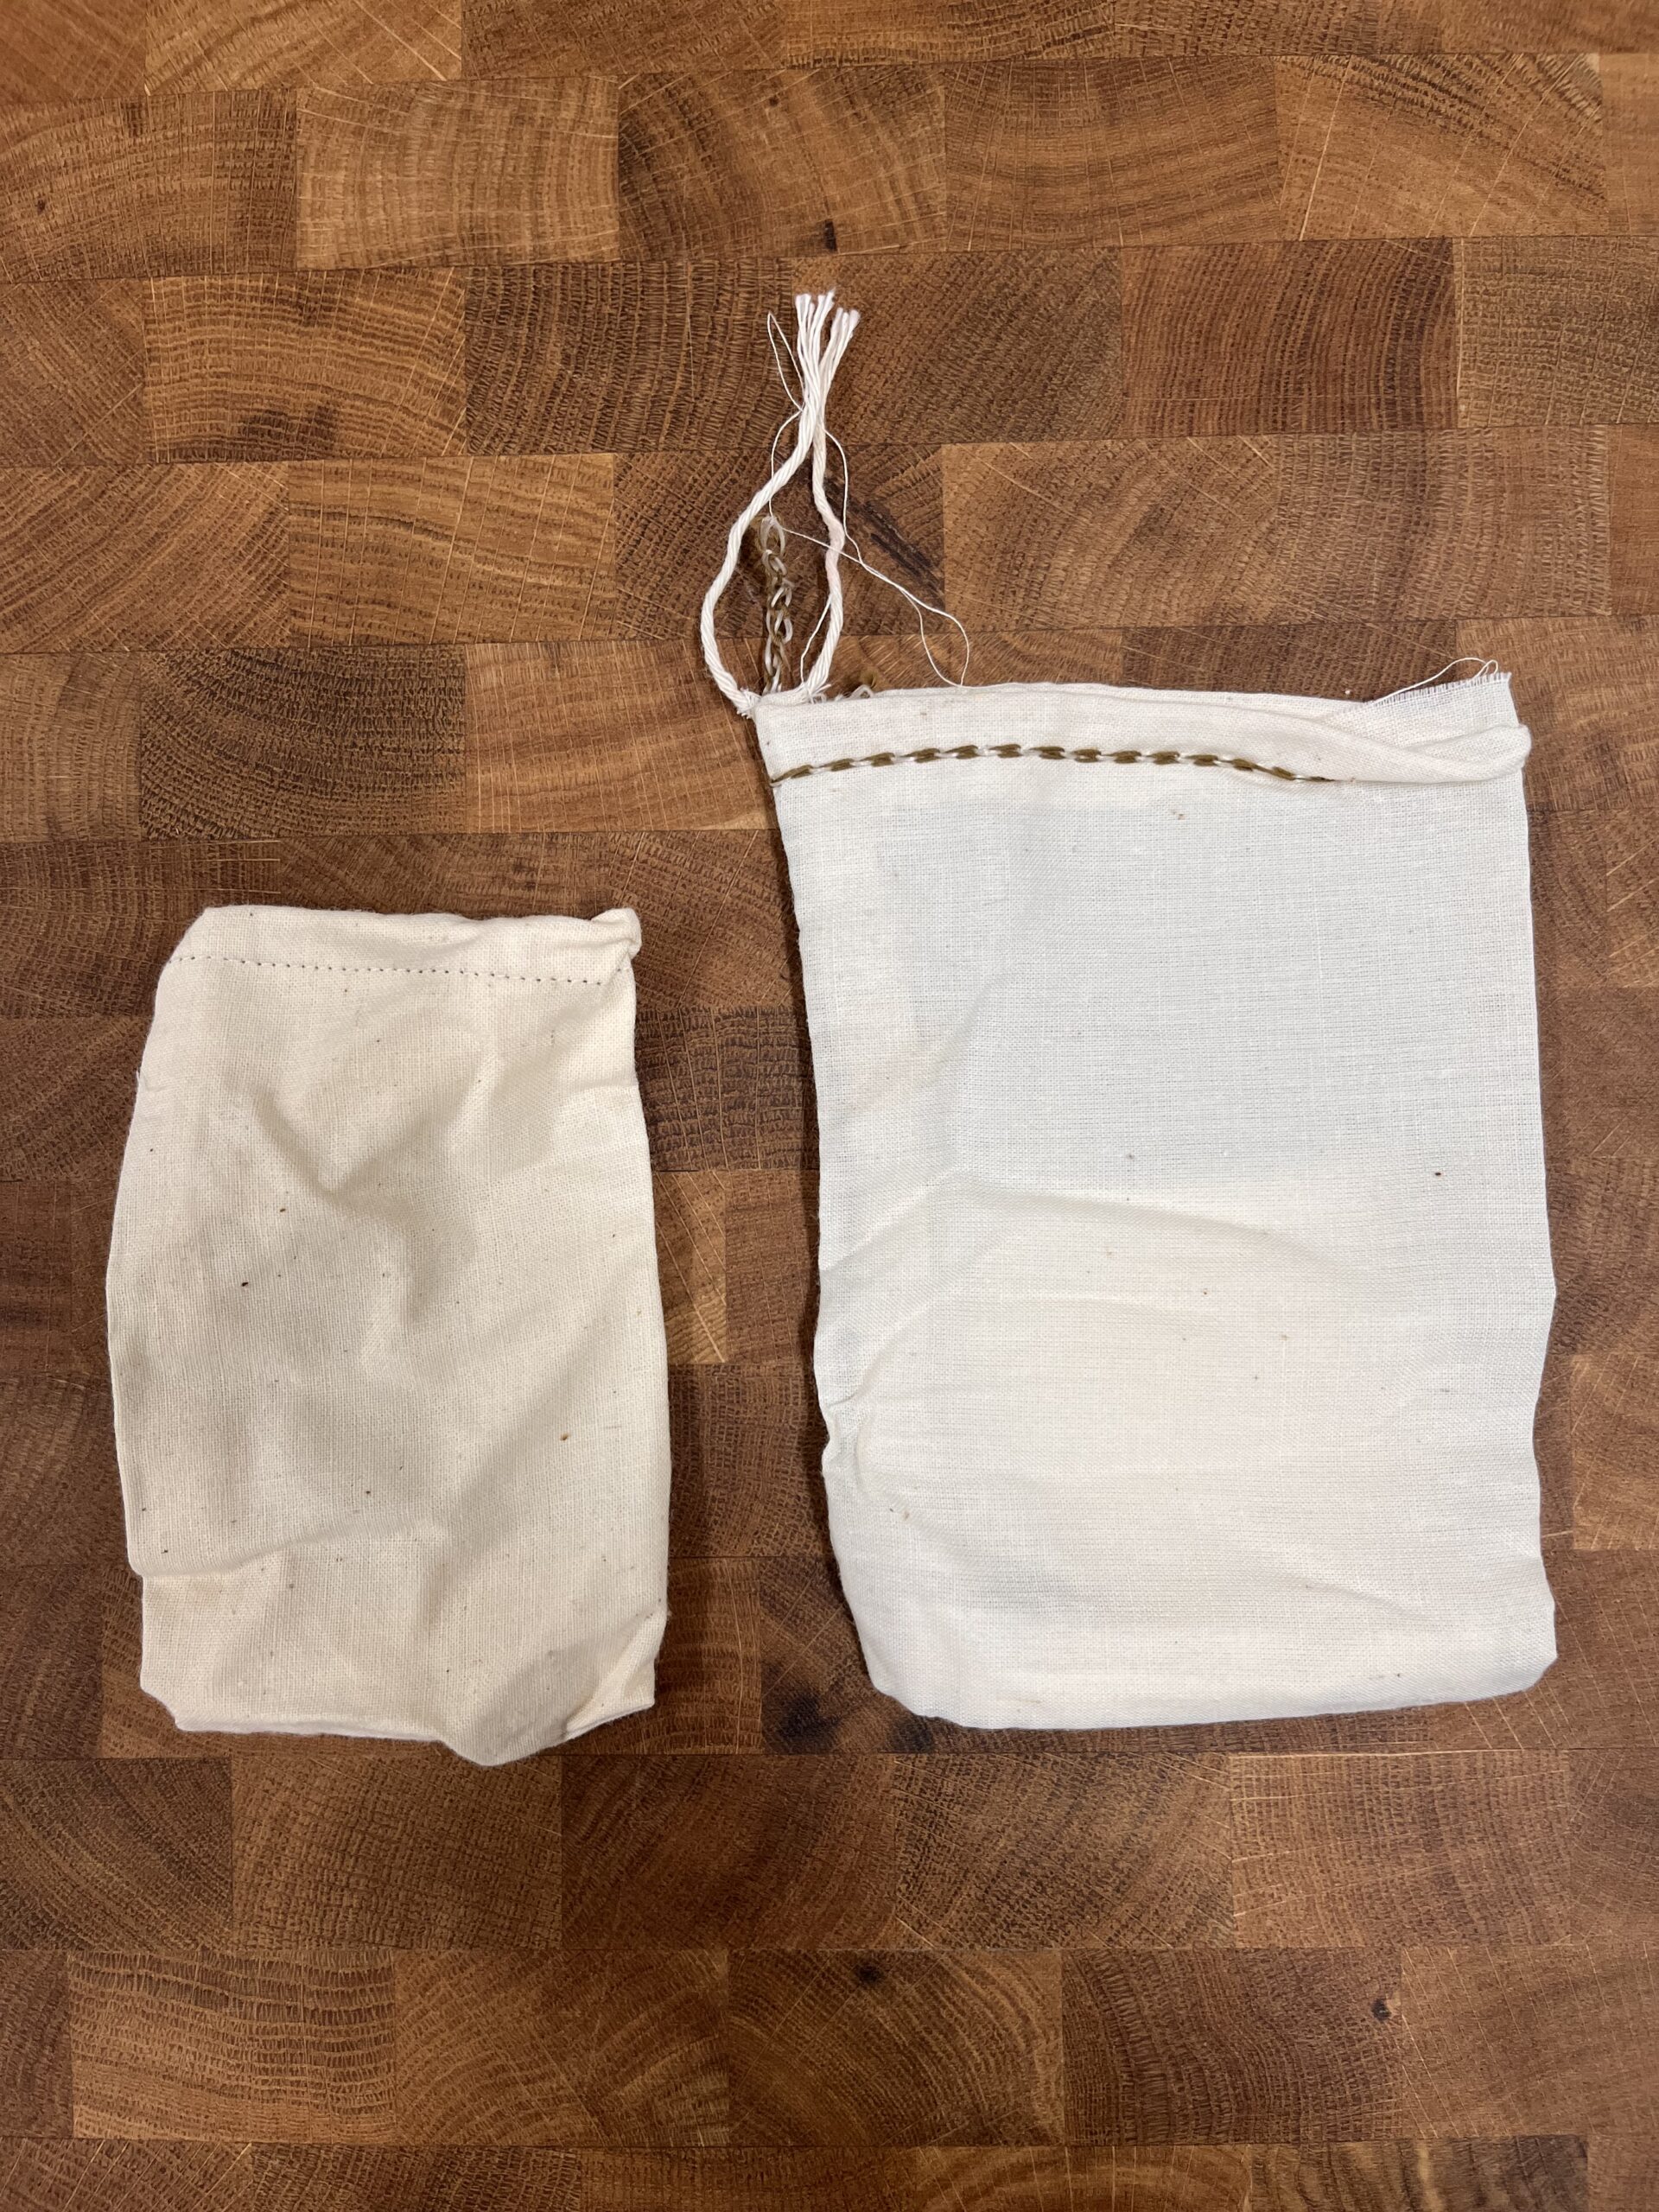 3x5" & 4x6" Cotton Bag side by side